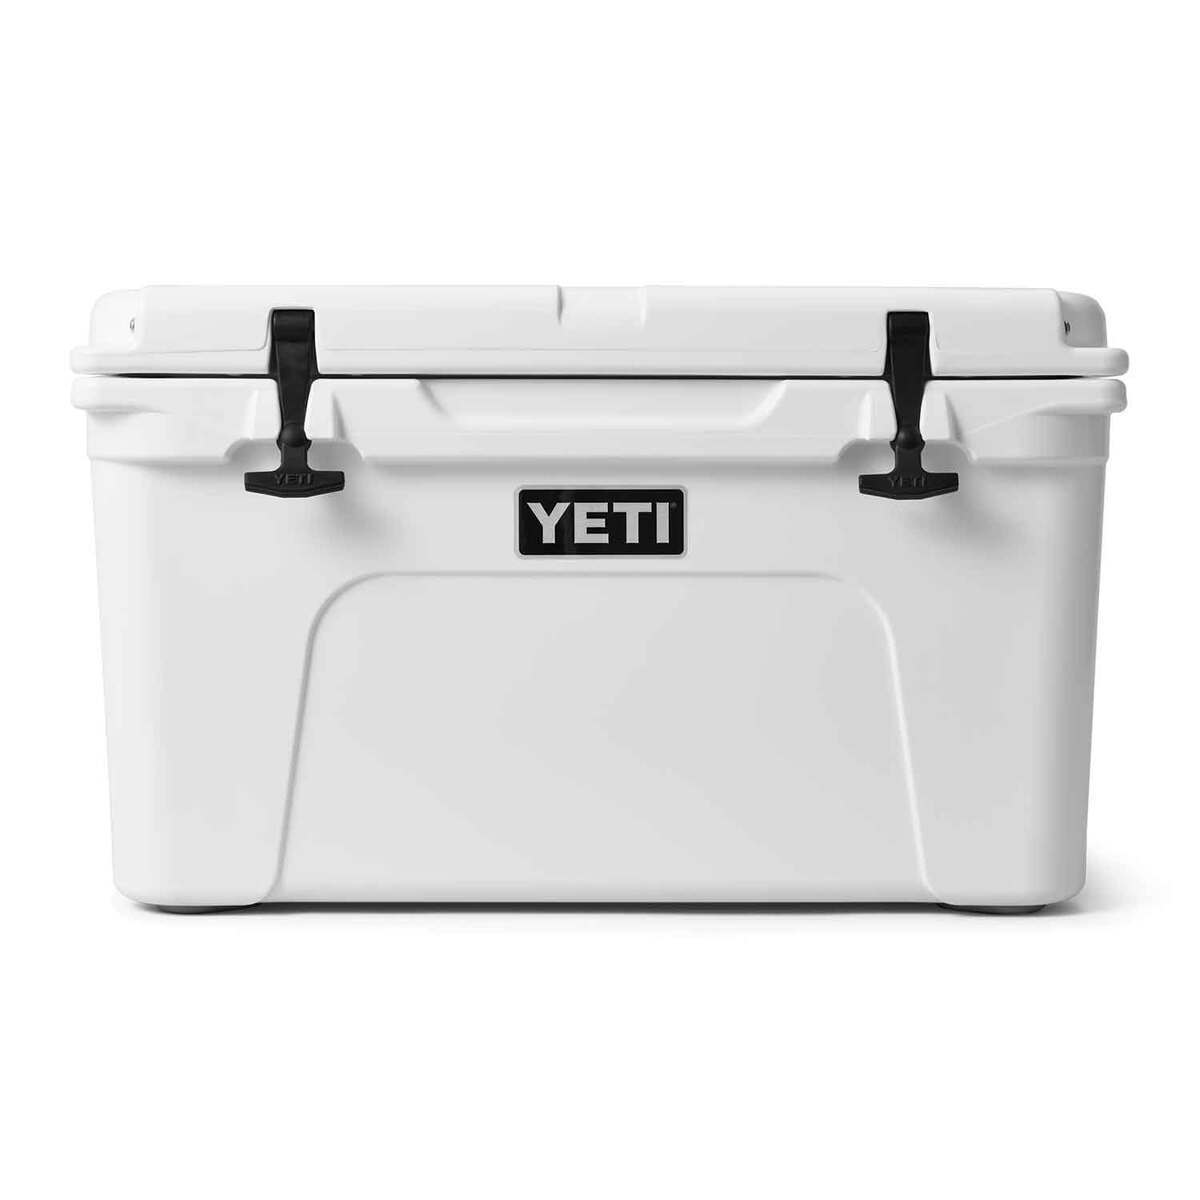 YETI - Tundra 45 Hard Cooler YT45T-TN-Quality Foreign Outdoor and